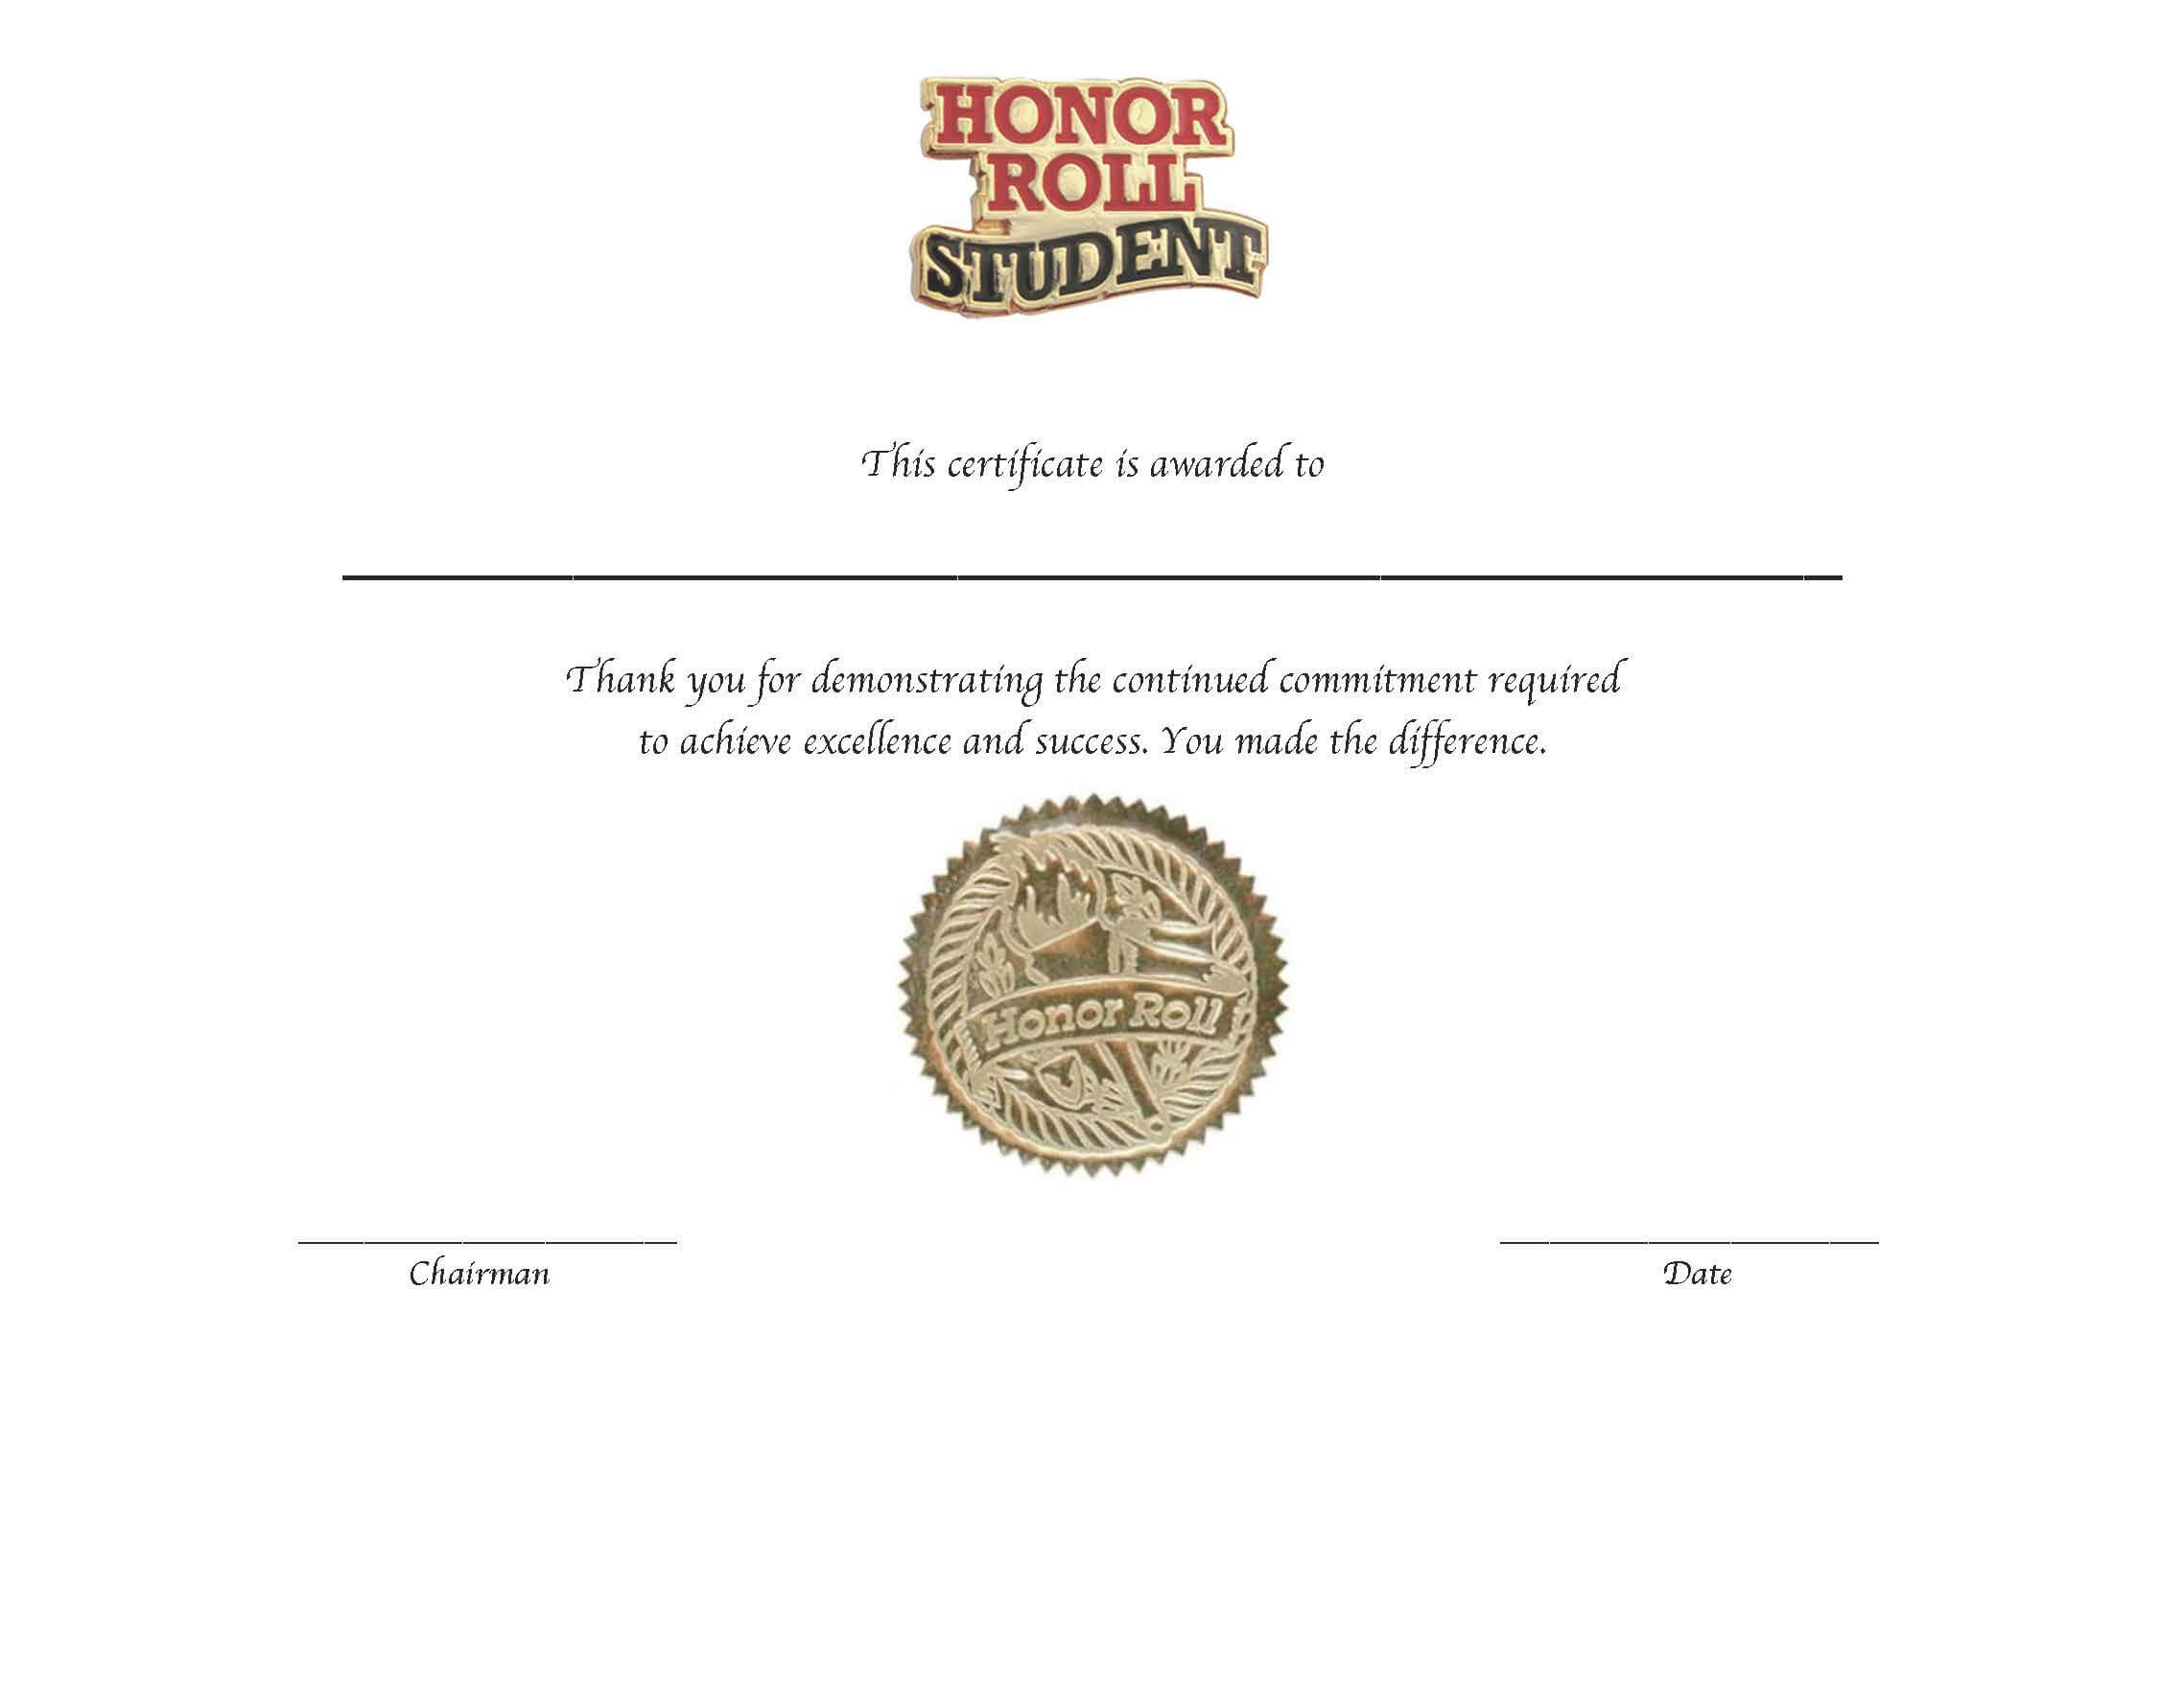 Honor Roll Certificate Template Word ] – Free Downloadable In Honor Roll Certificate Template